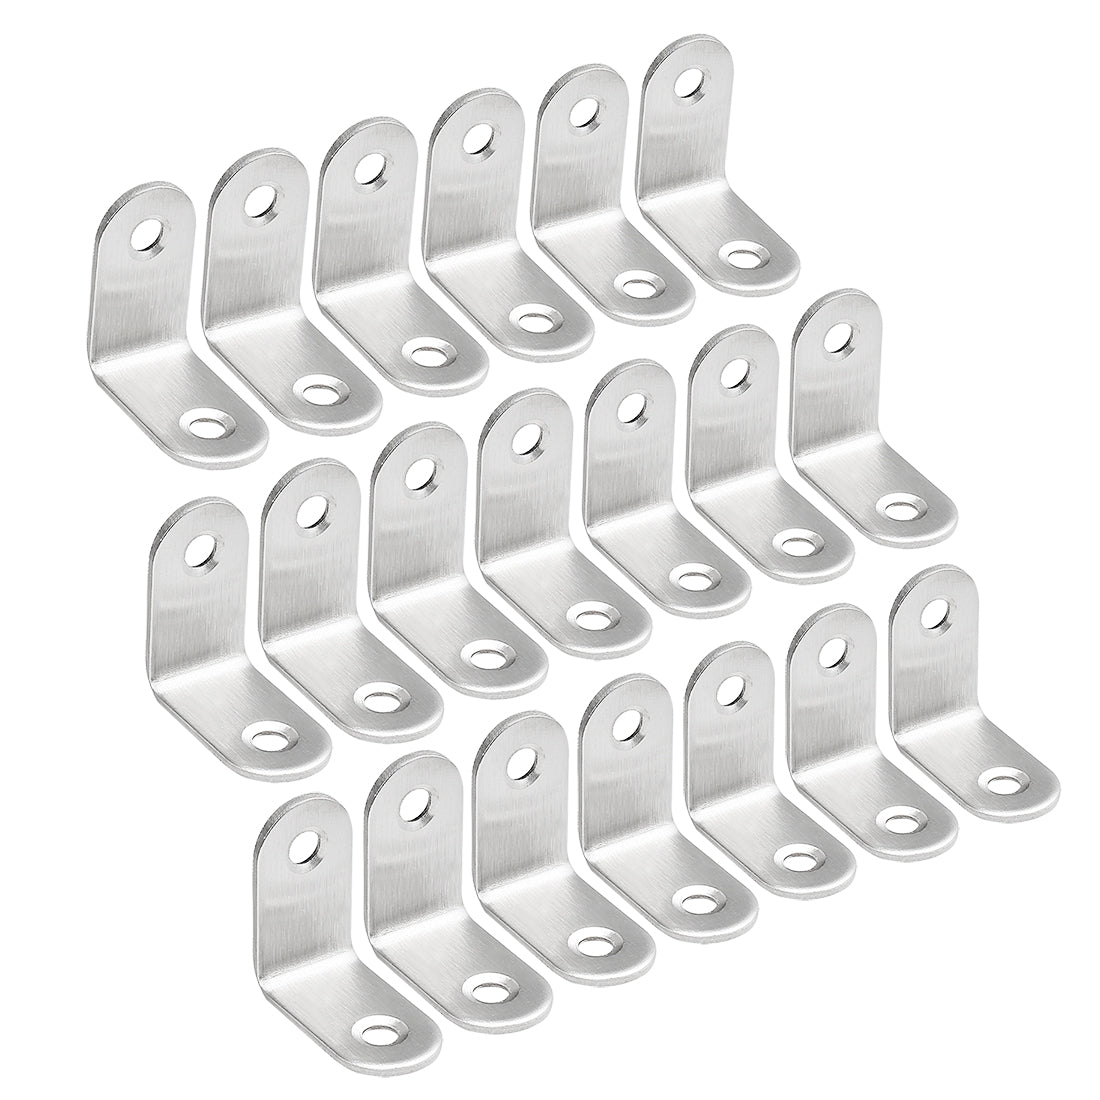 uxcell Uxcell 20pcs 30mmx30mmx16mm Stainless Steel Corner Brace Joint L Shape Right Angle Bracket Fastener